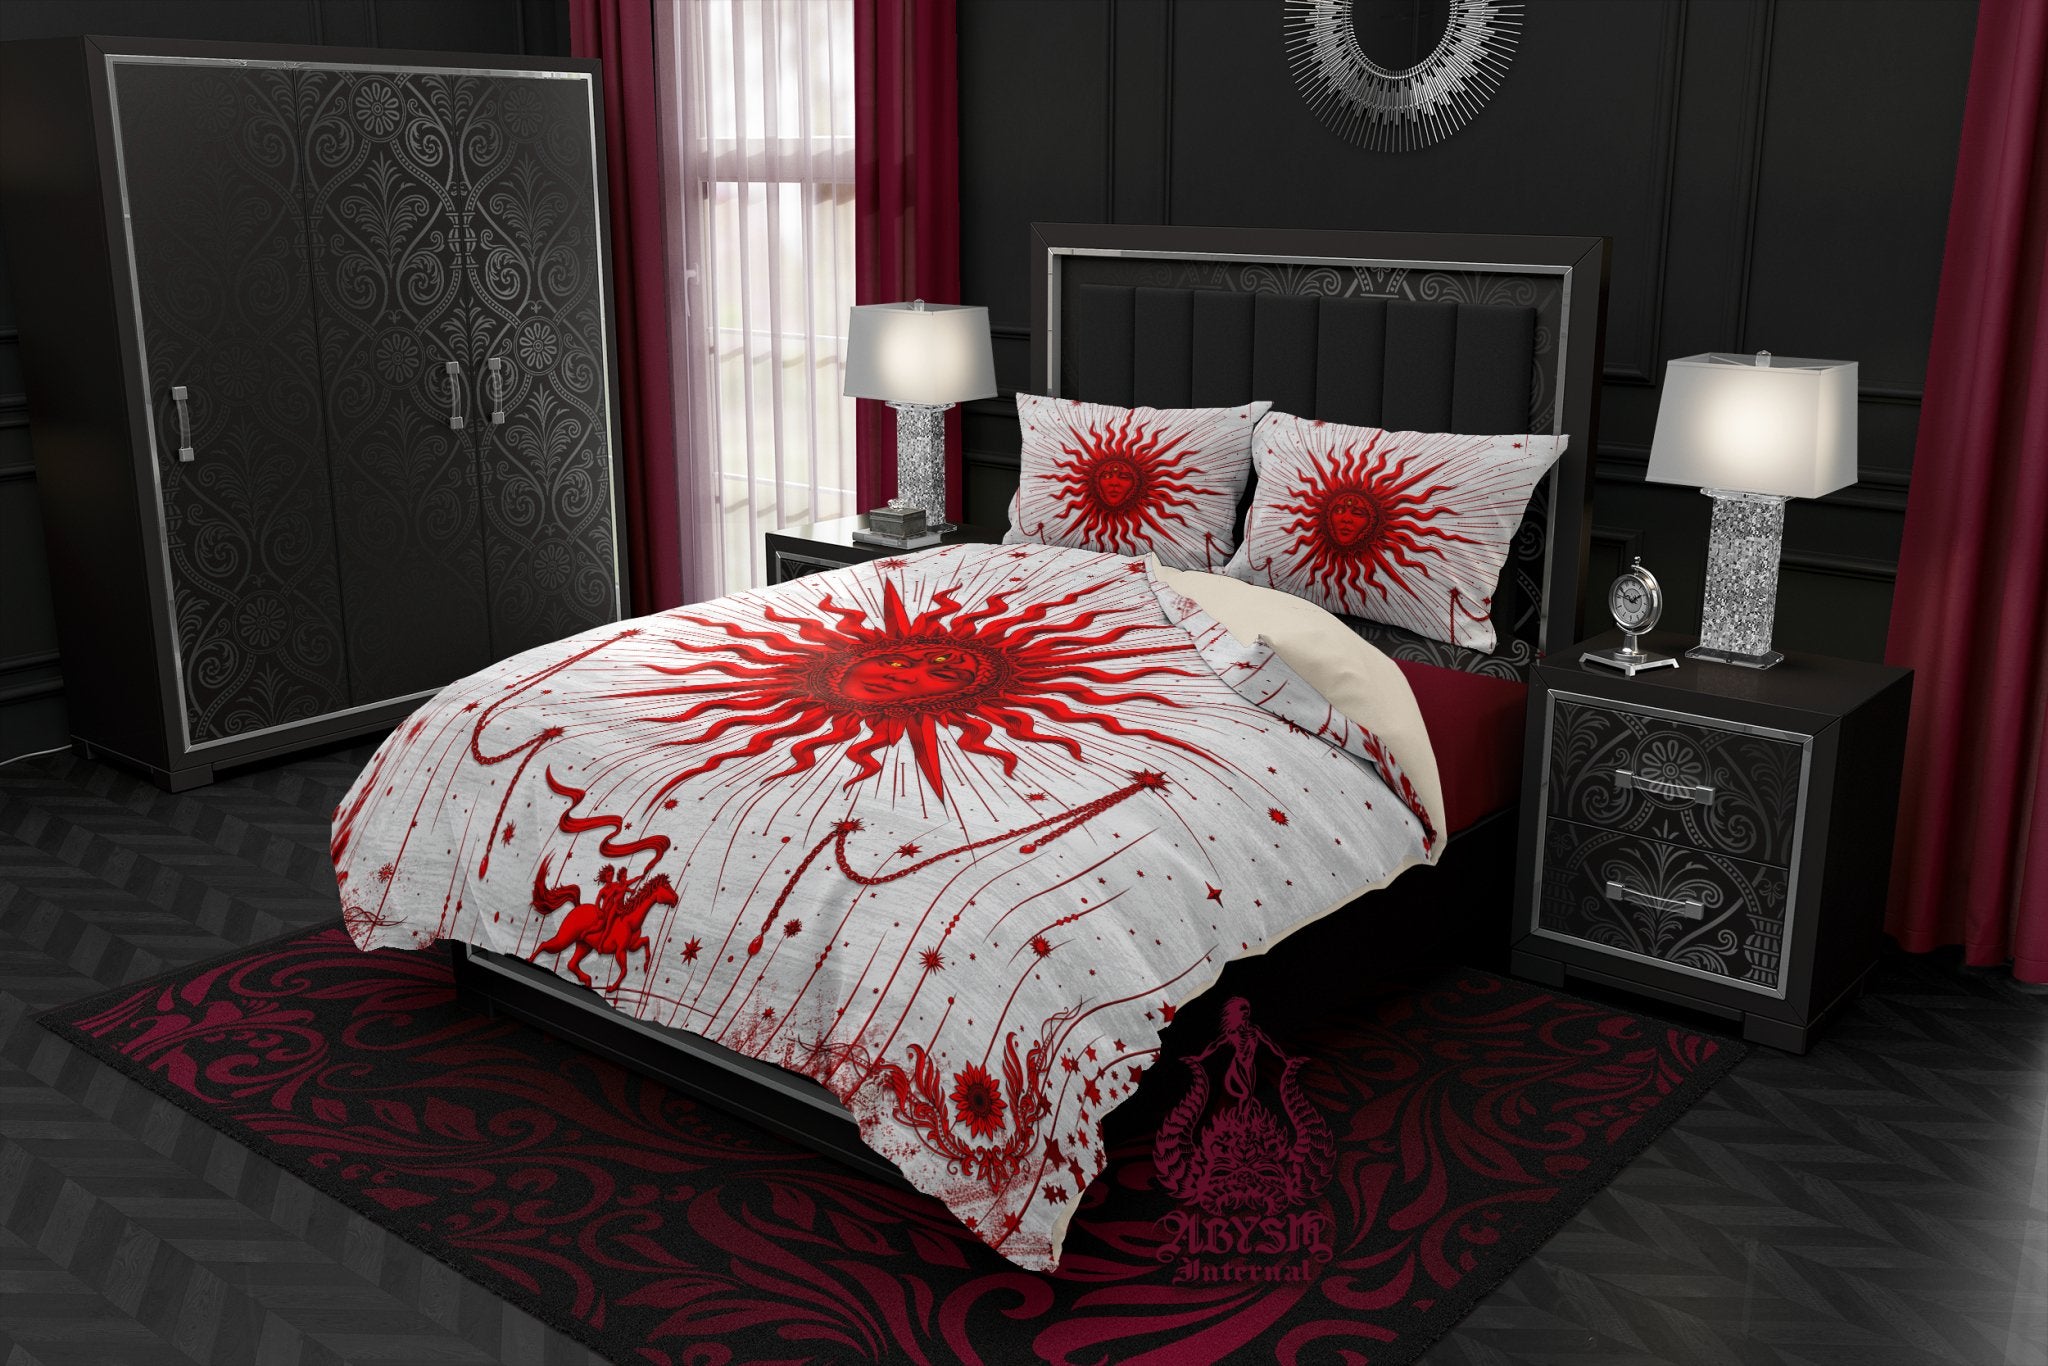 White Goth Sun Duvet Cover, Bed Covering, Esoteric Comforter, Bloody Bedroom Decor King, Queen & Twin Bedding Set - Tarot Arcana Art, Red - Abysm Internal